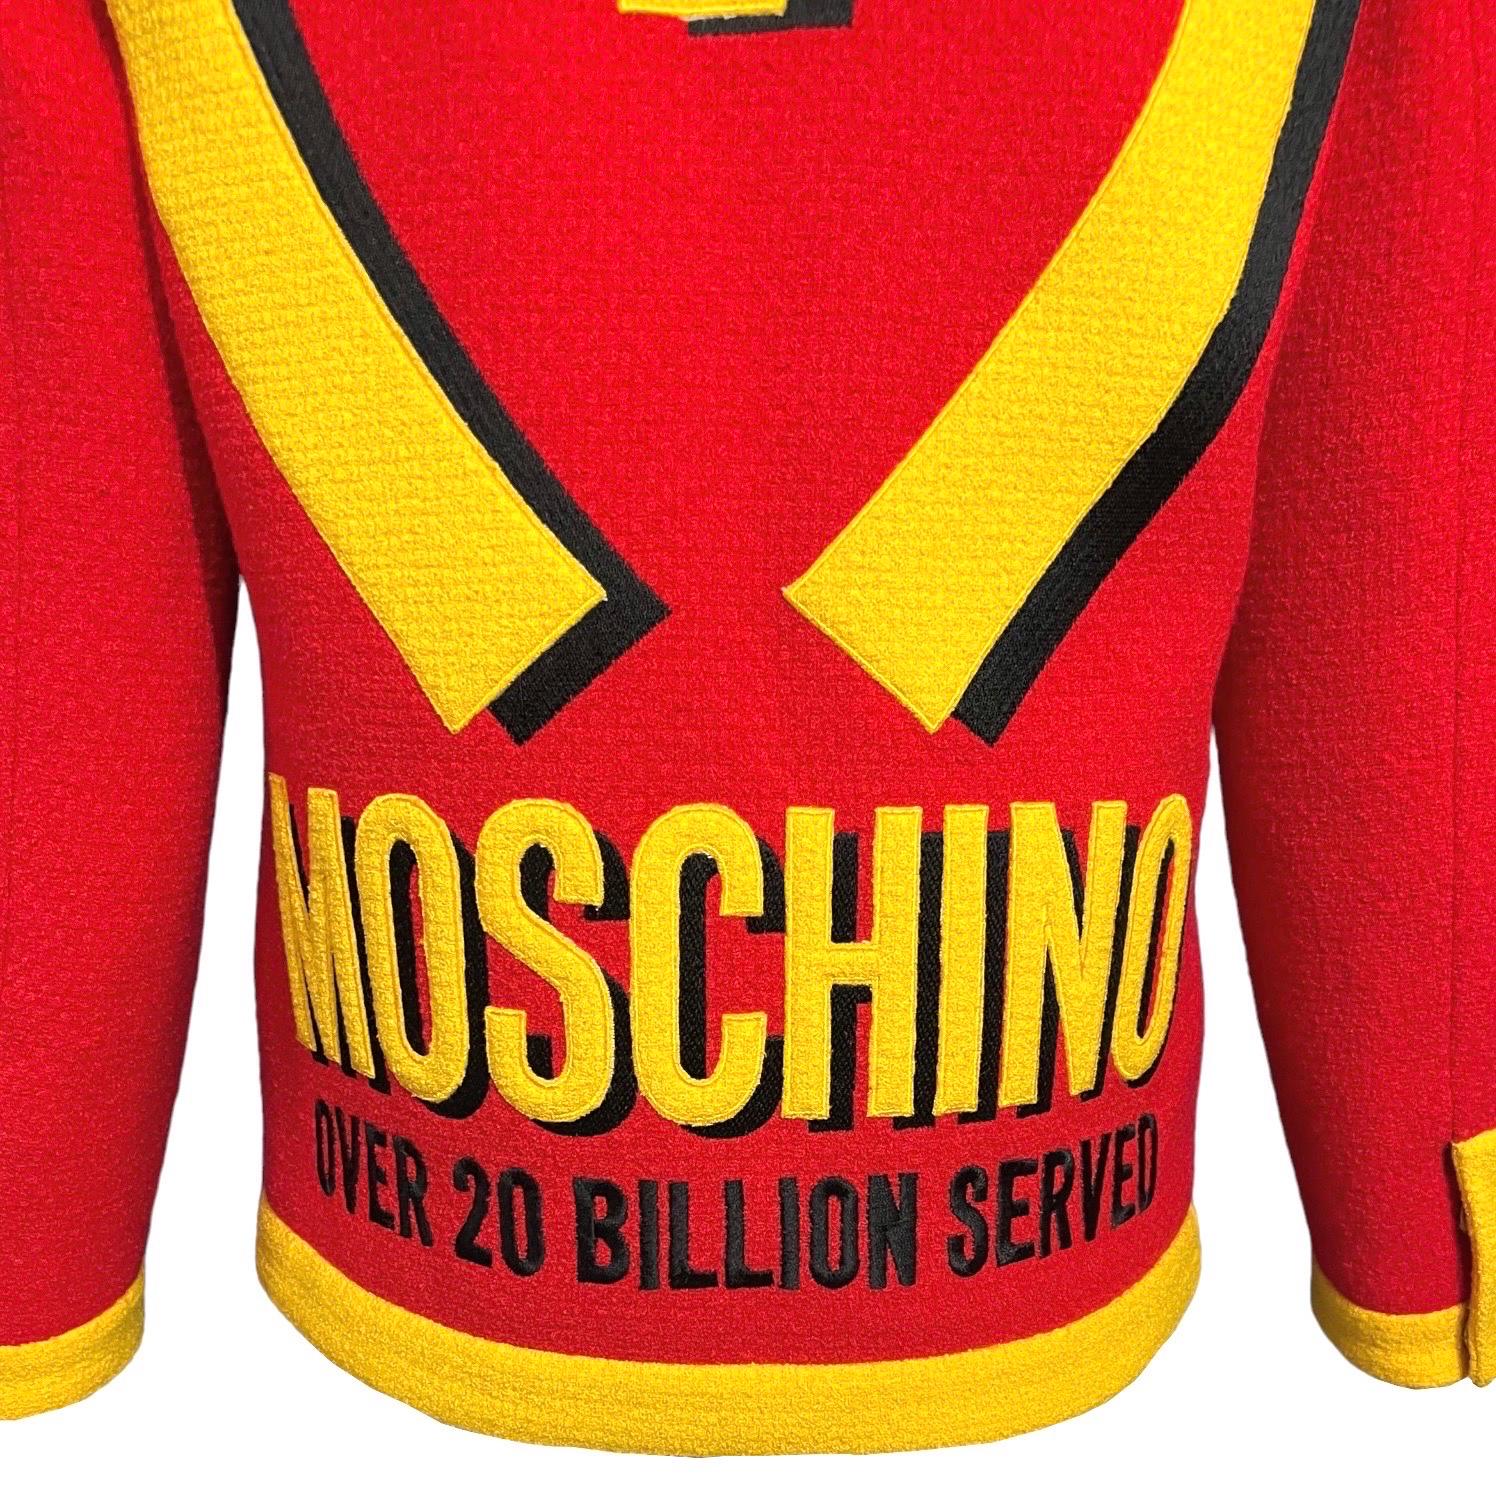 Moschino Couture McDonalds Runway Tweed Blazer F/W 2014 For Sale 7